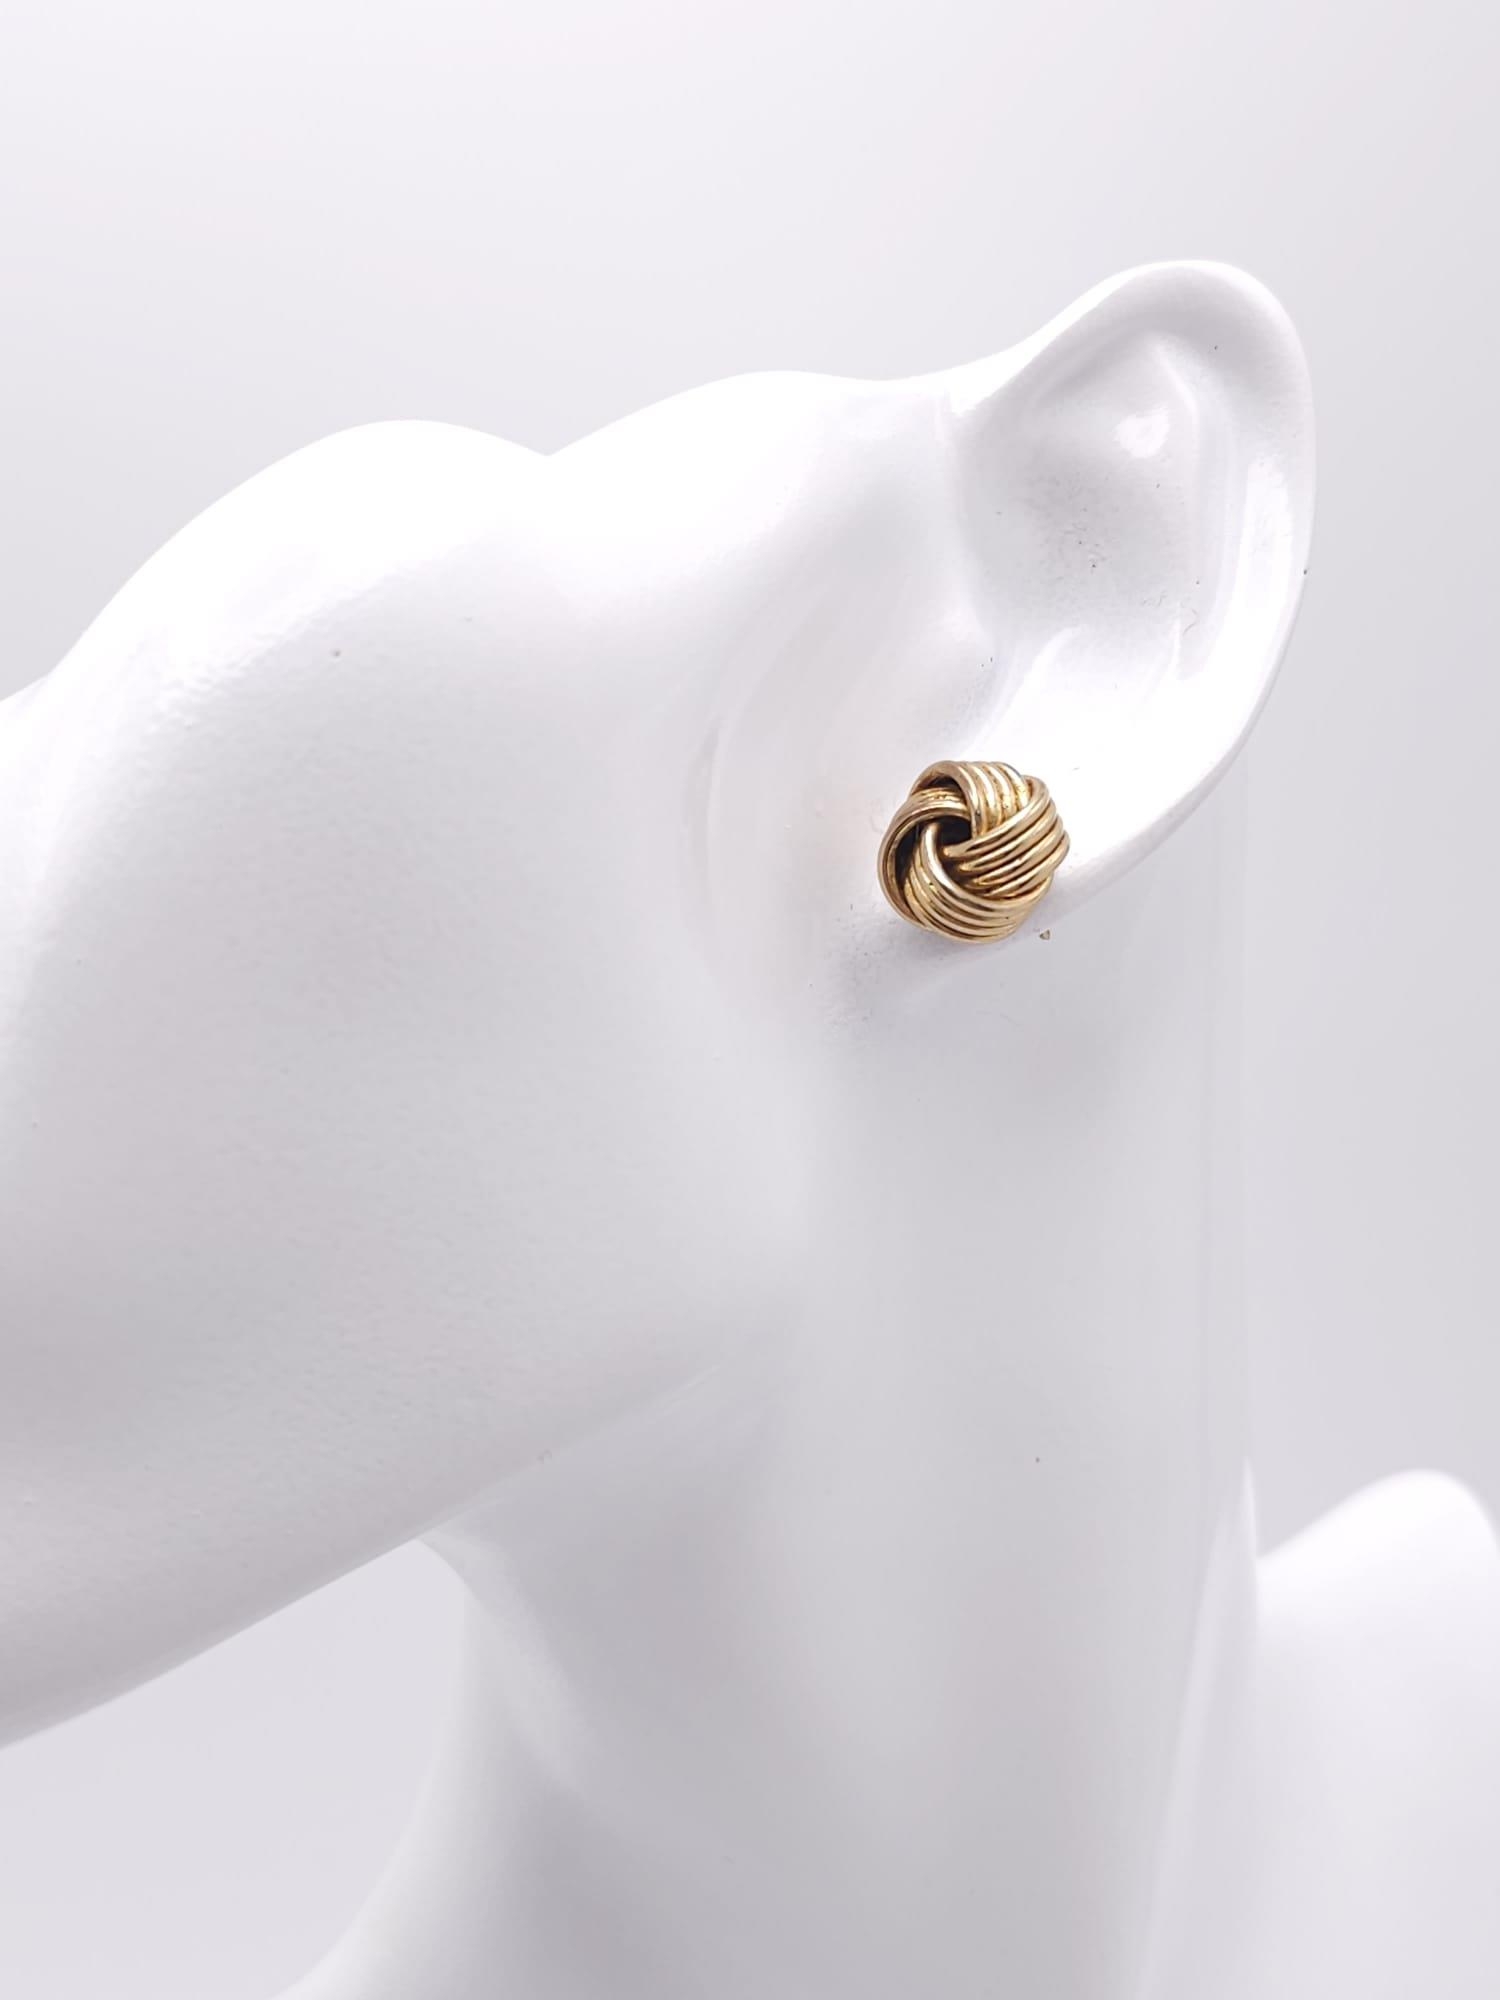 A Pair of 9k Yellow Gold Knot Stud Earrings. 3.8g total weight. Ref: 16469 - Image 6 of 6